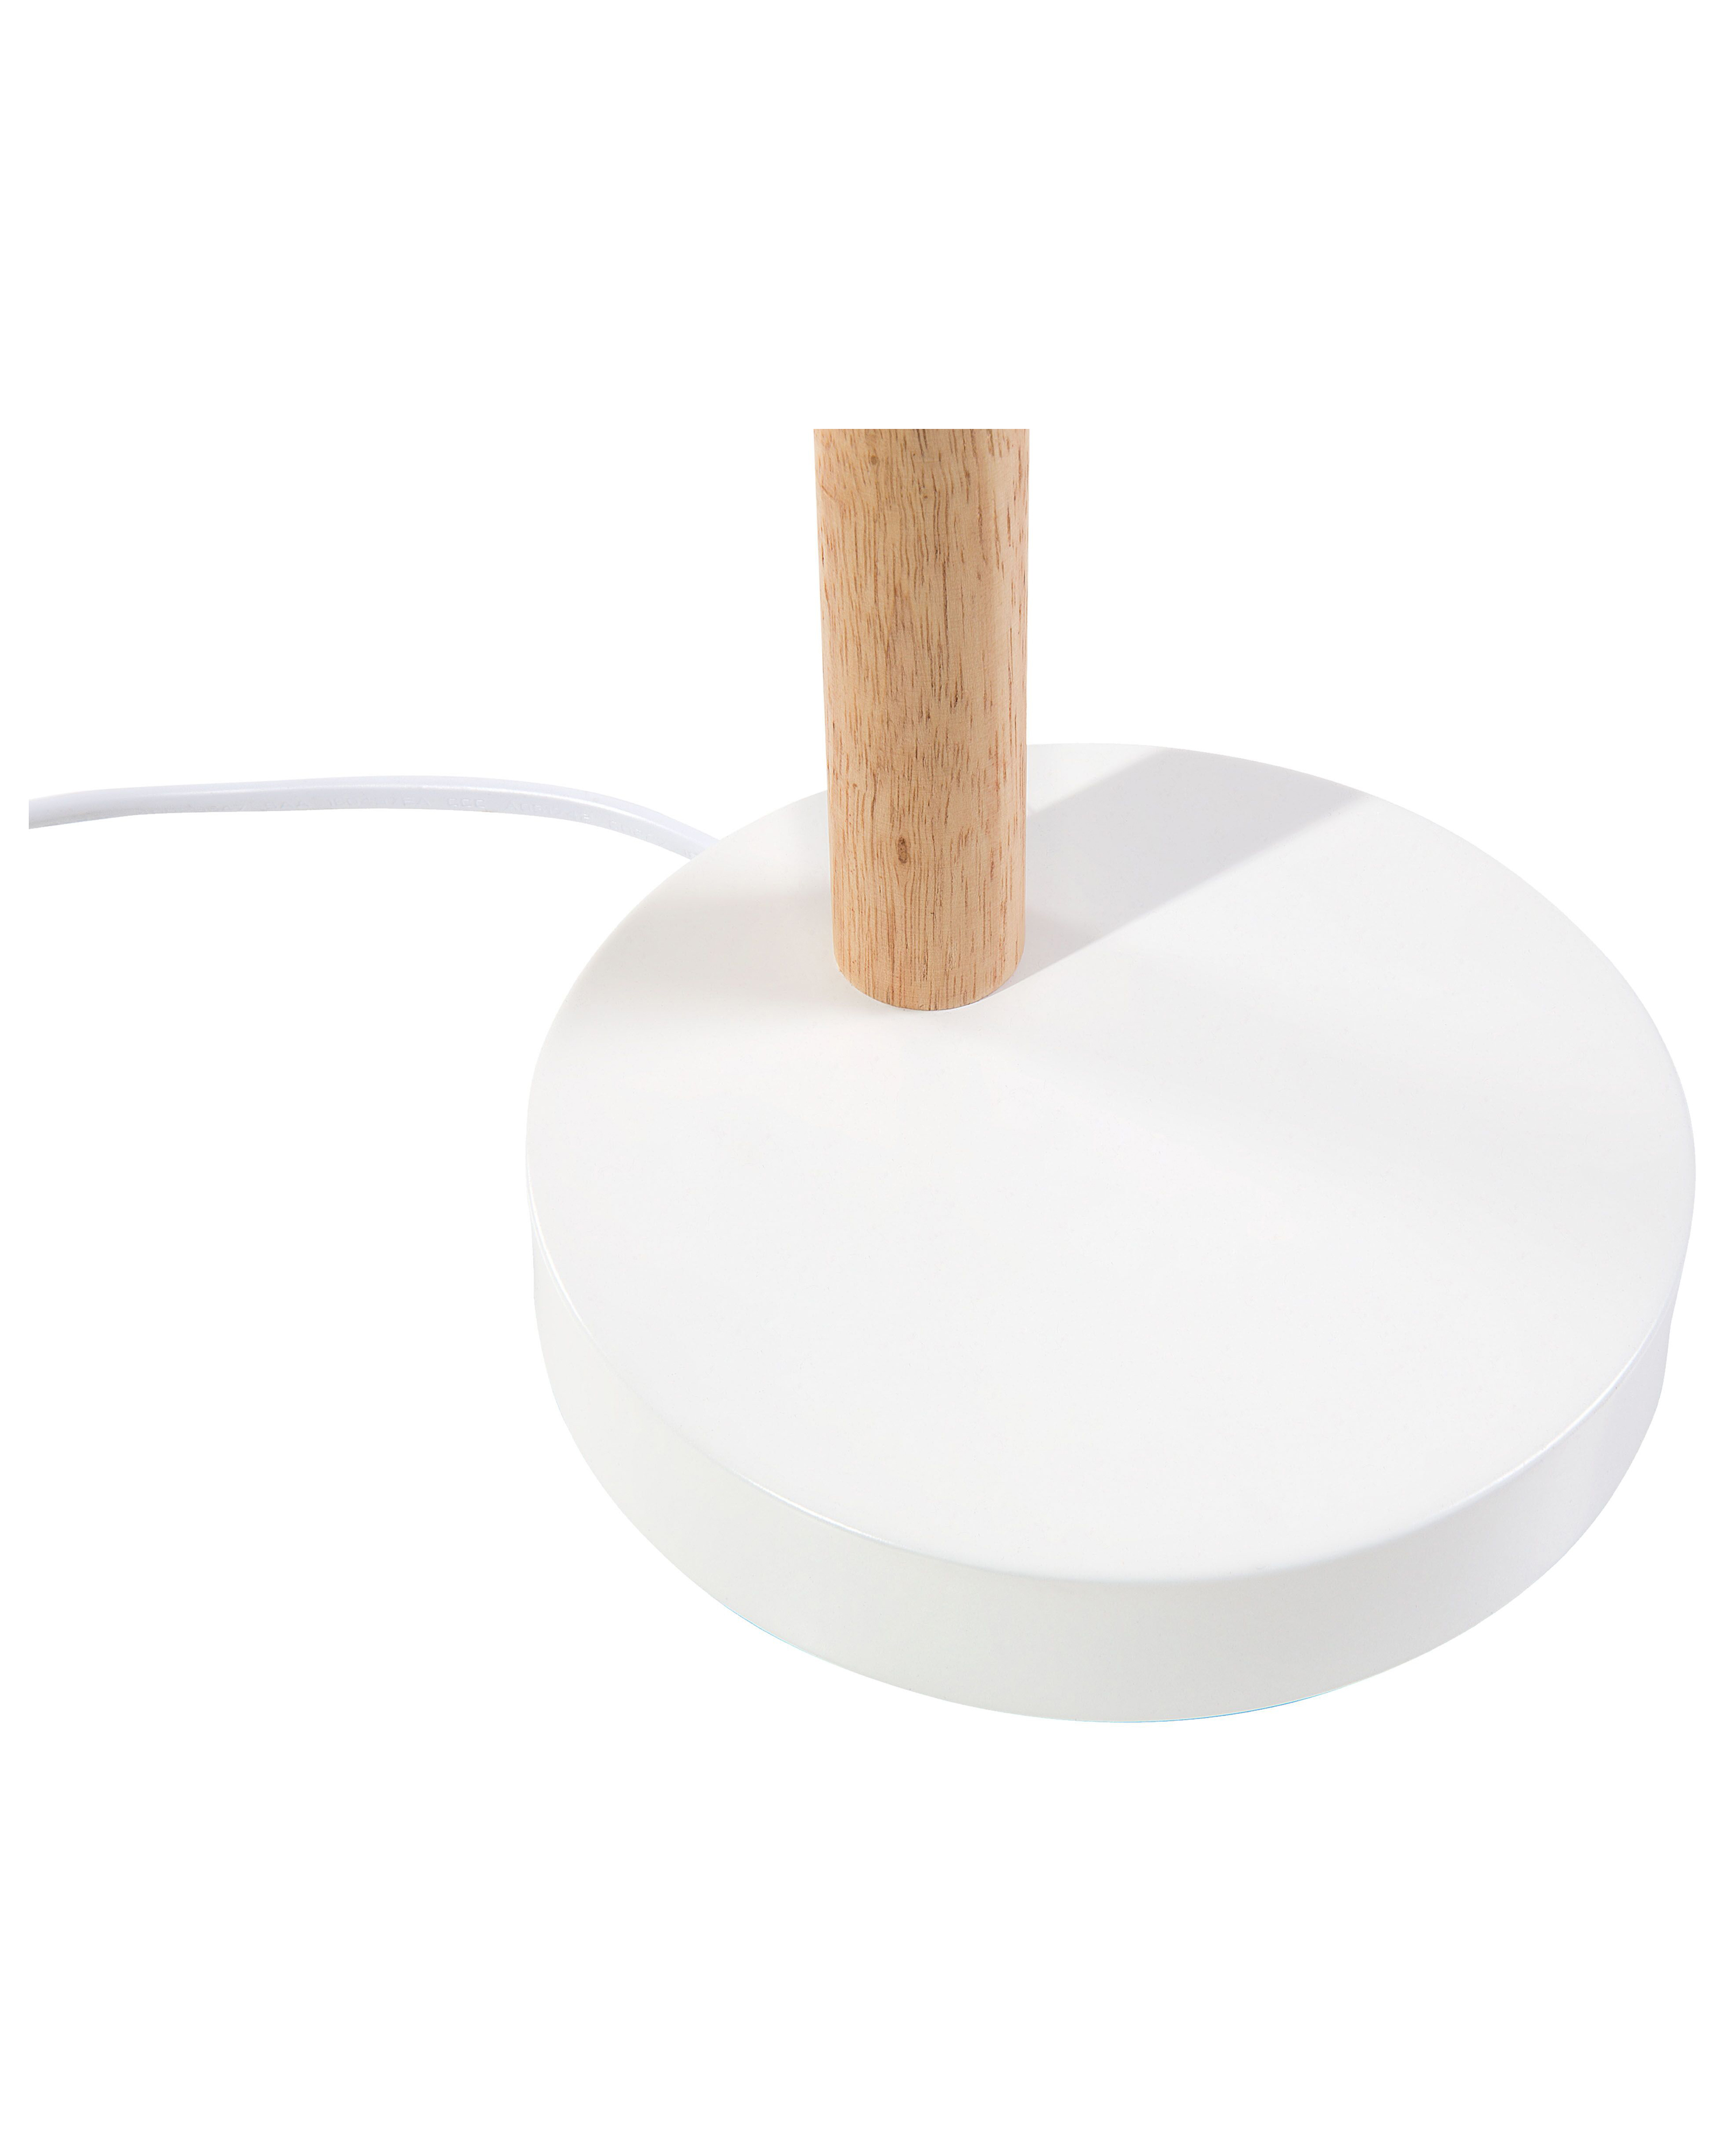 Table Lamp White and Light Wood PECKOS_680485